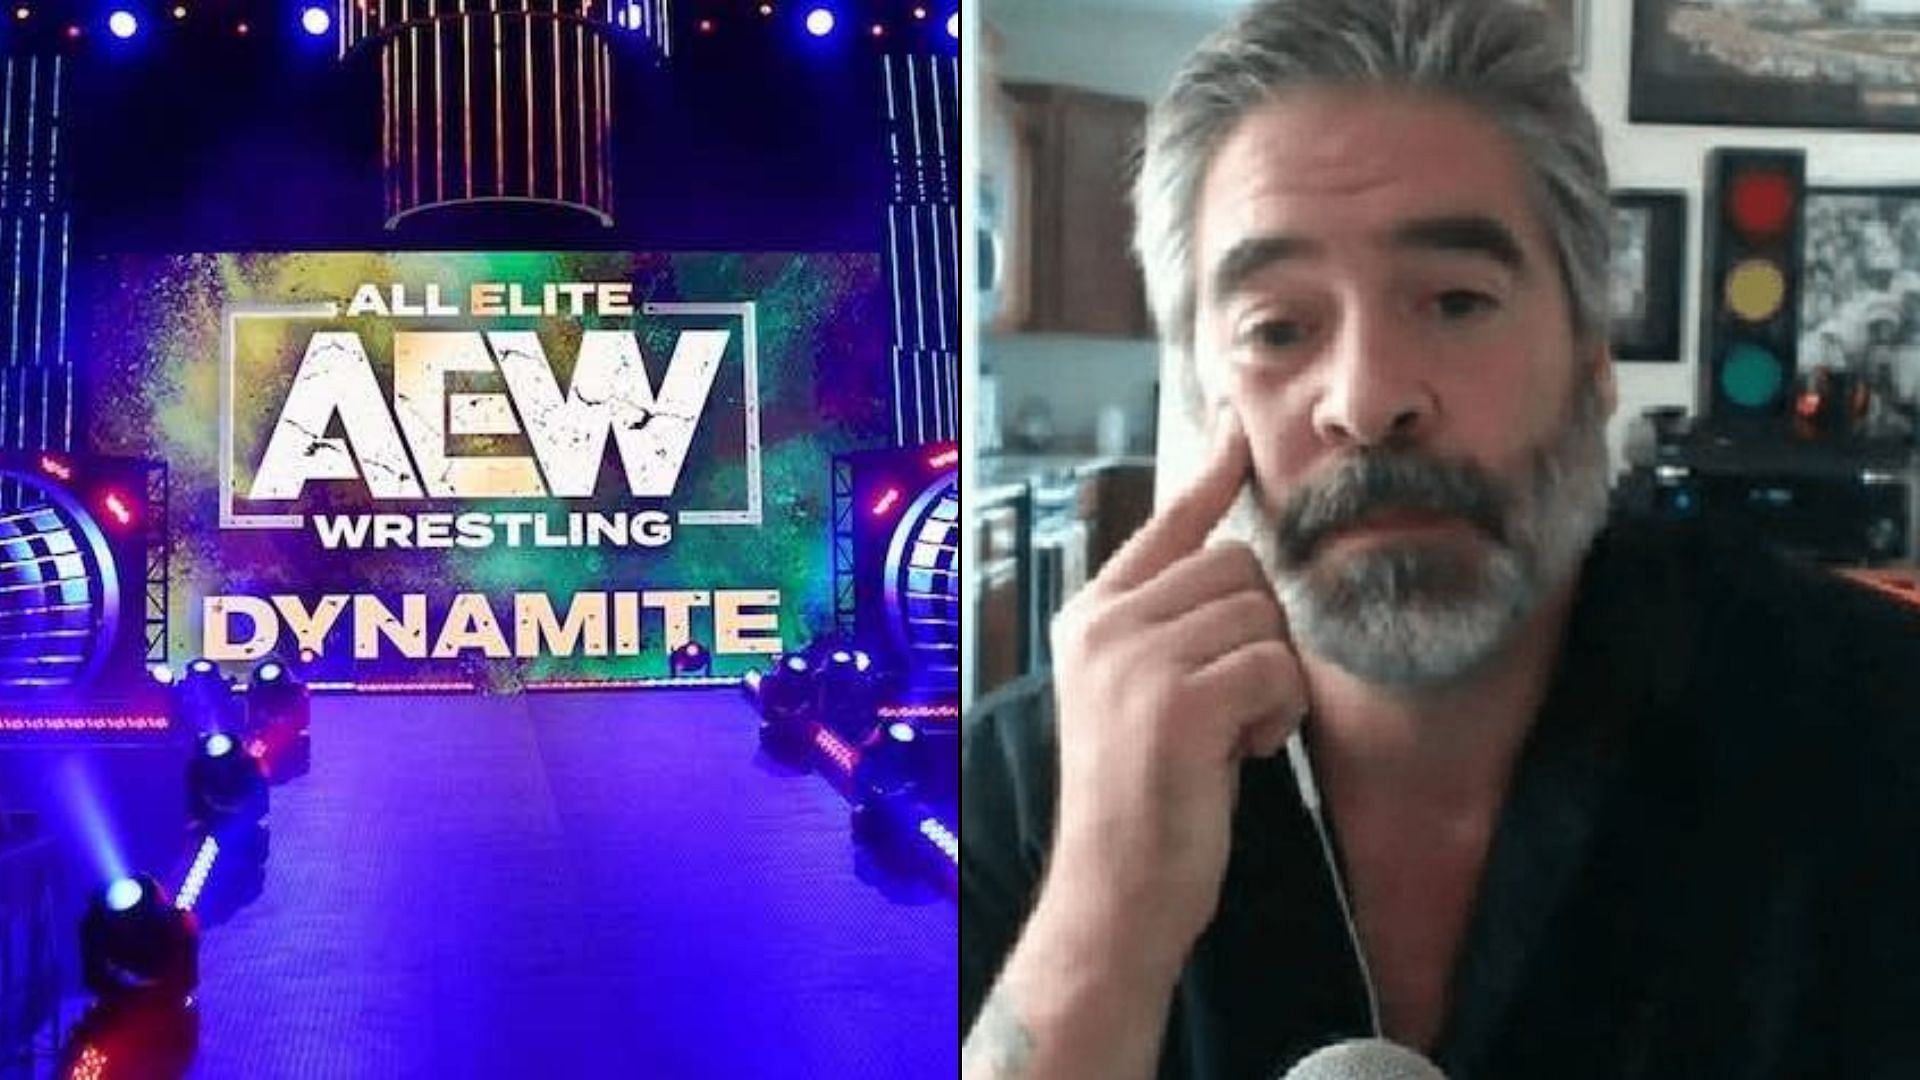 AEW Dynamite (left), Vince Russo (right)